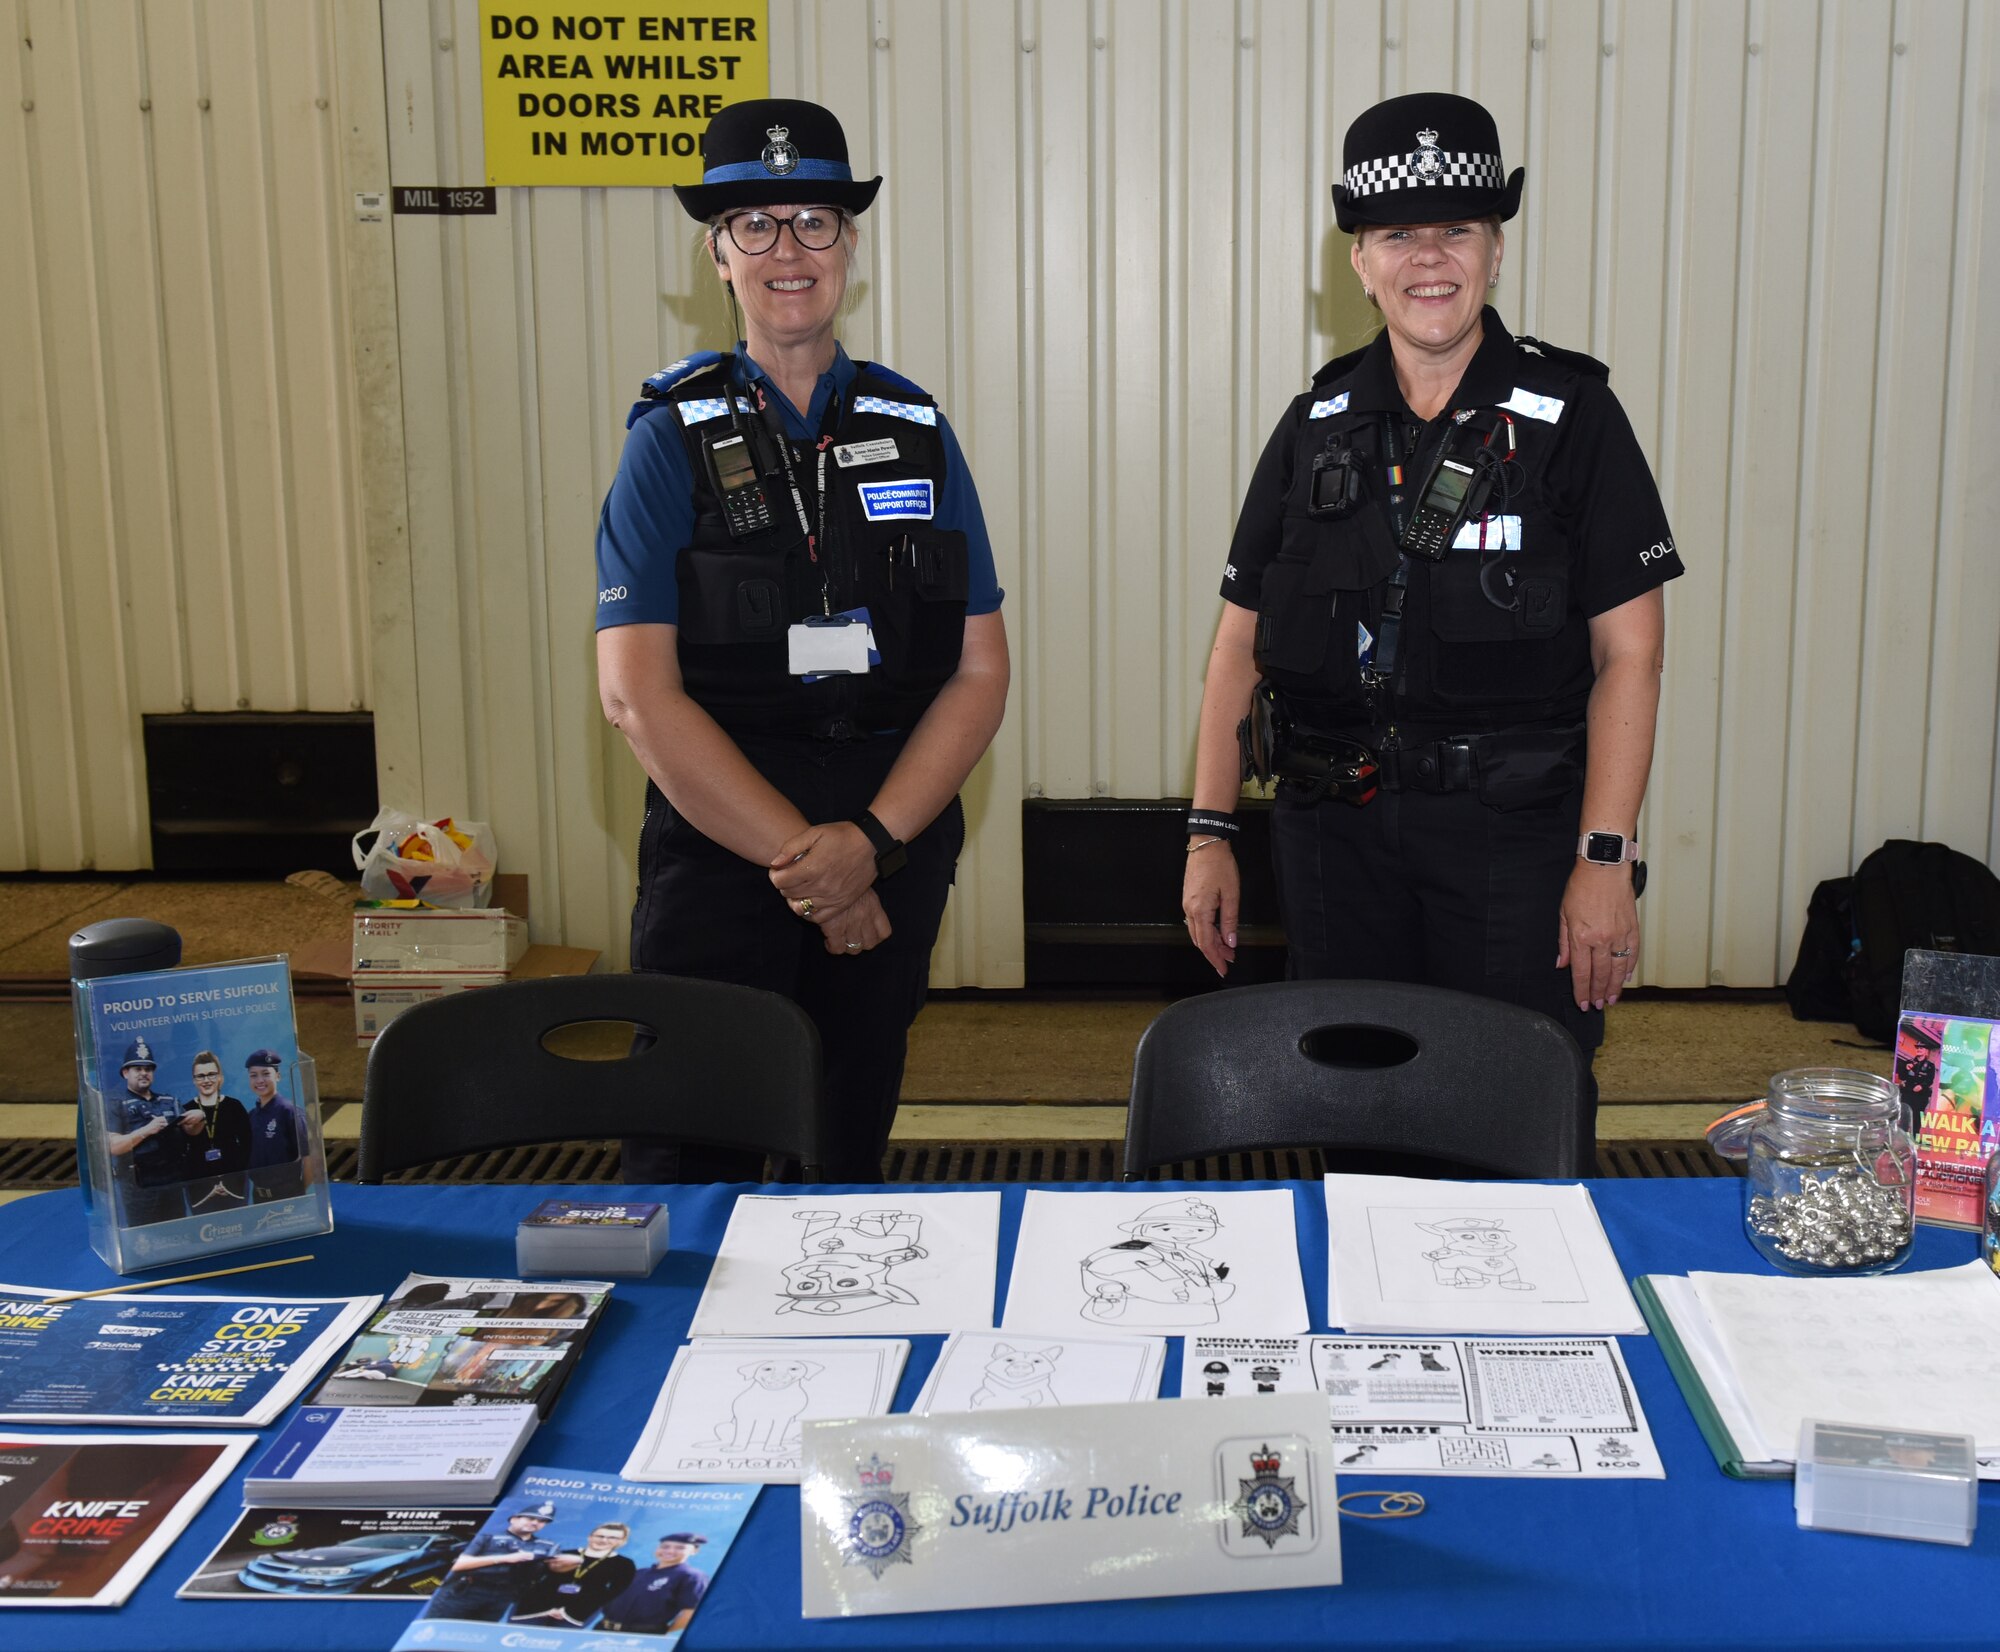 Suffolk Police pose for a photo at their booth at the Diversity and Inclusion Day event at Royal Air Force Mildenhall, England, Aug. 13, 2021. The event included a variety of performances, food and informational booths, bouncy castles, a fire truck, Humvee and various static aircraft. (U.S. Air Force photo by Karen Abeyasekere)